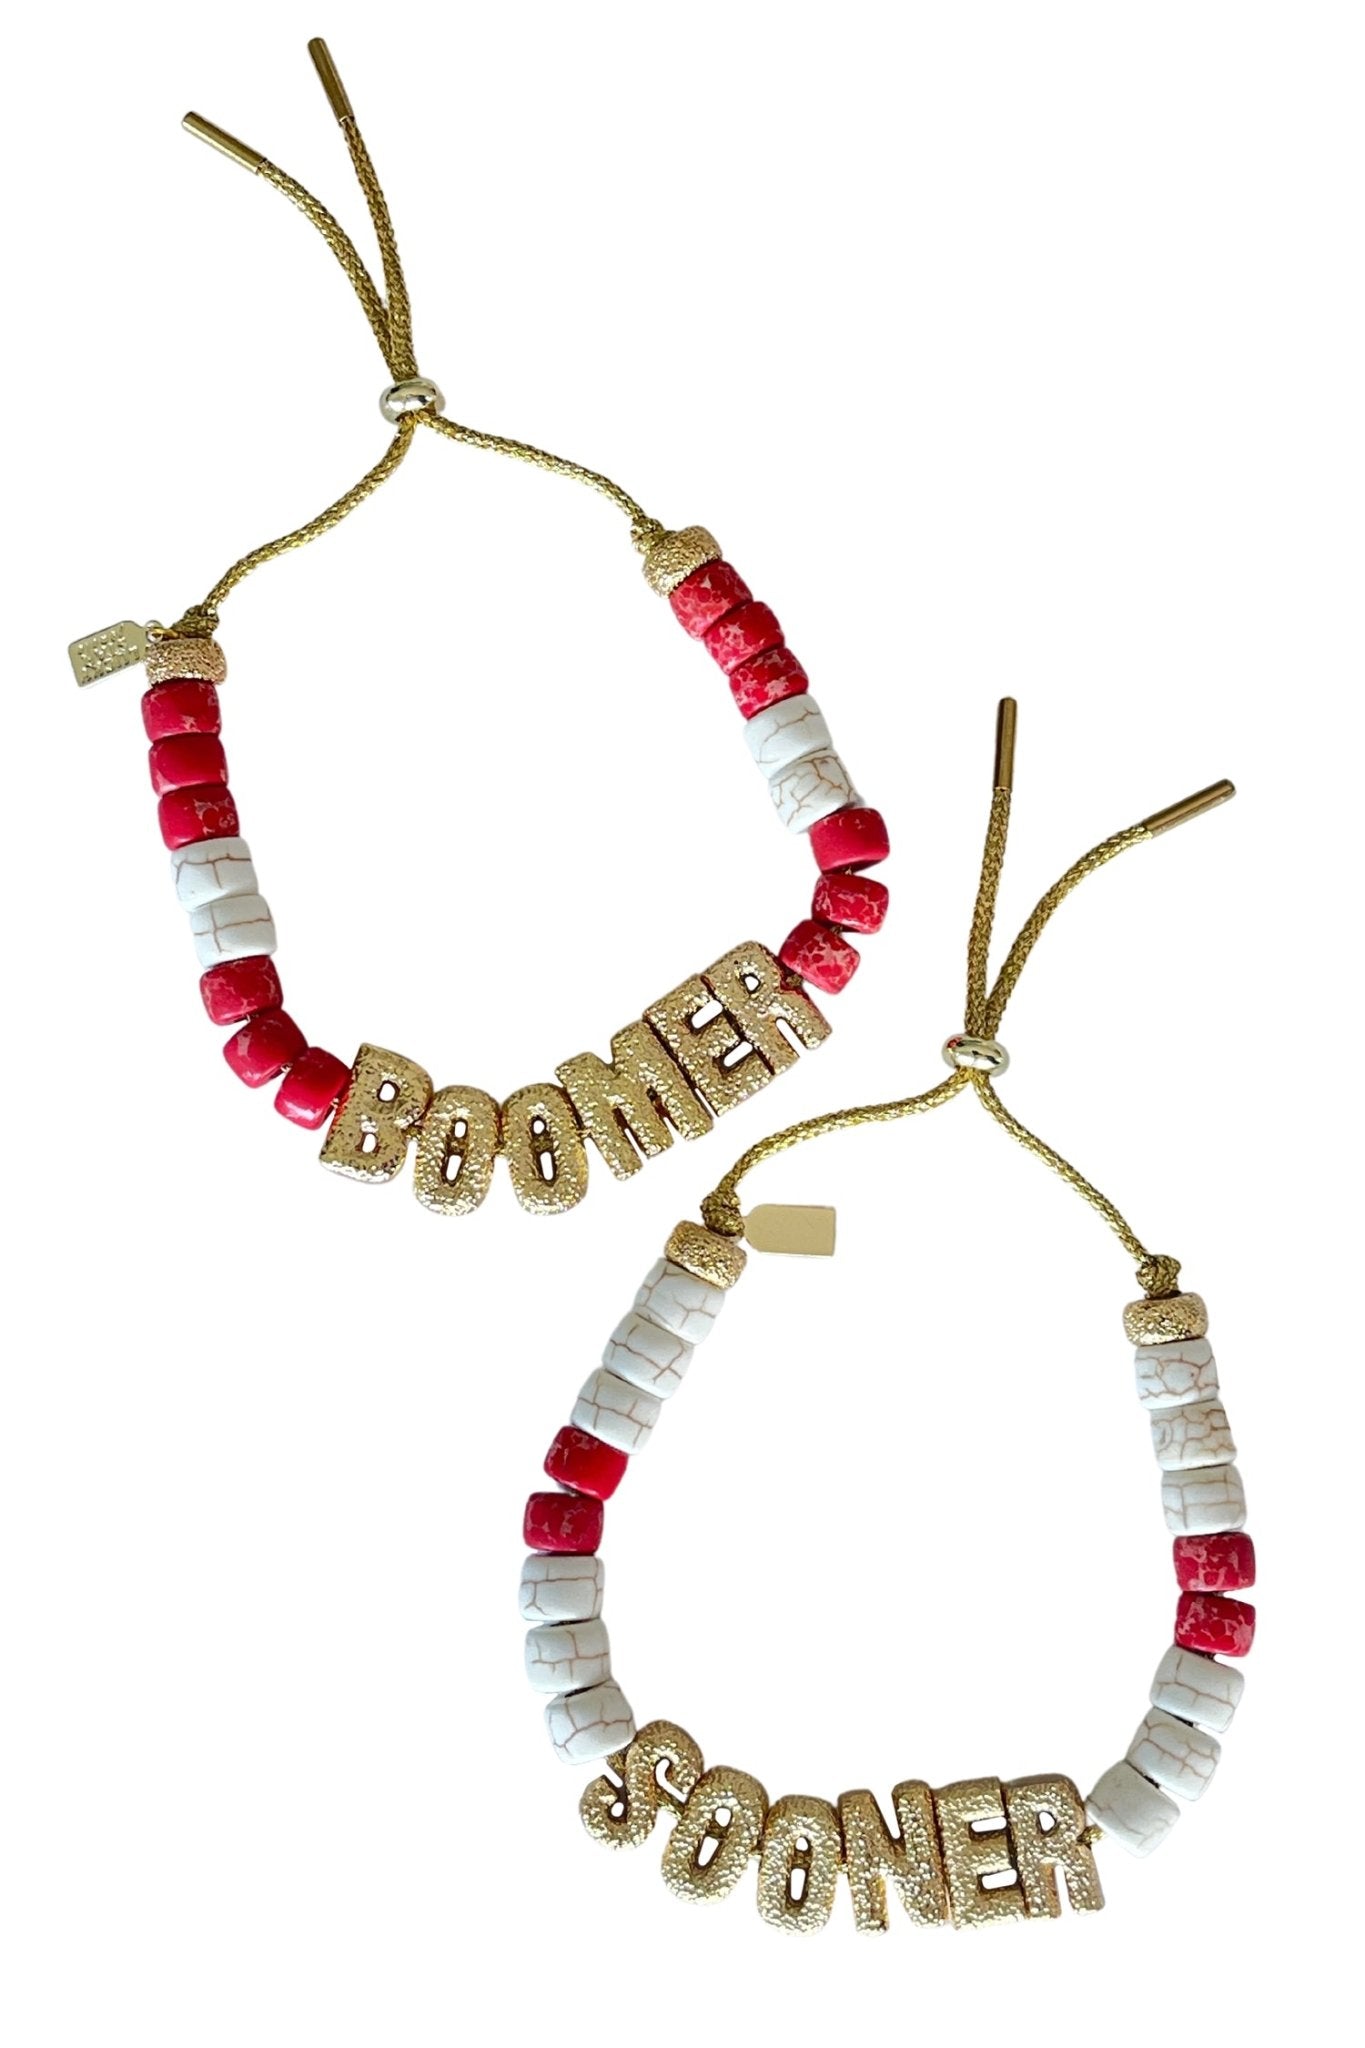 White + Red Eye Candy "Sooner" ID Bracelet - Lucky Star Jewels - Color Game